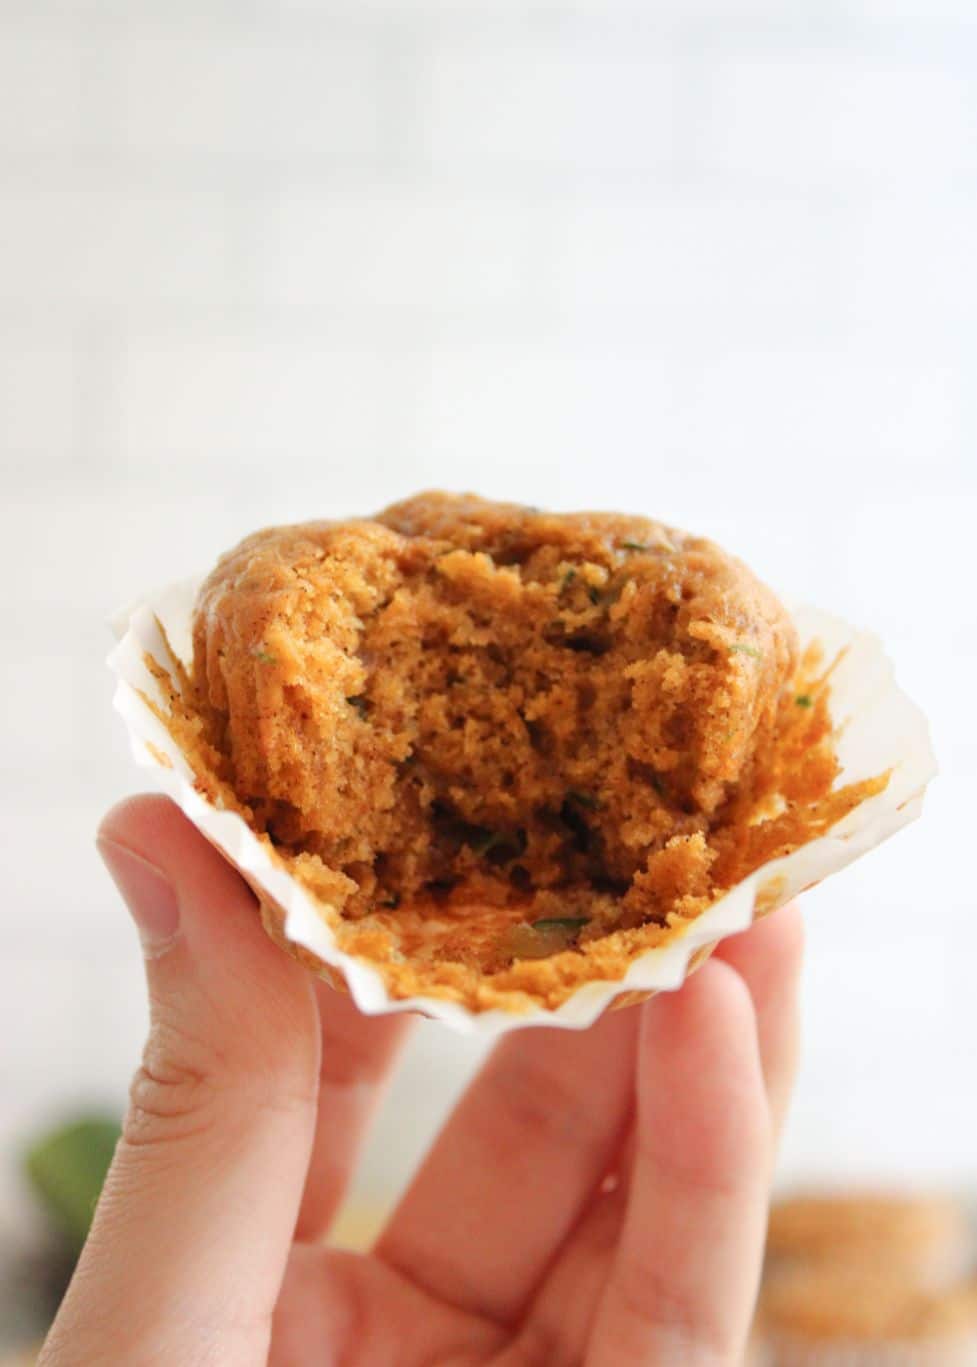 A pumpkin muffin served in a white muffin liner being held up by a hand